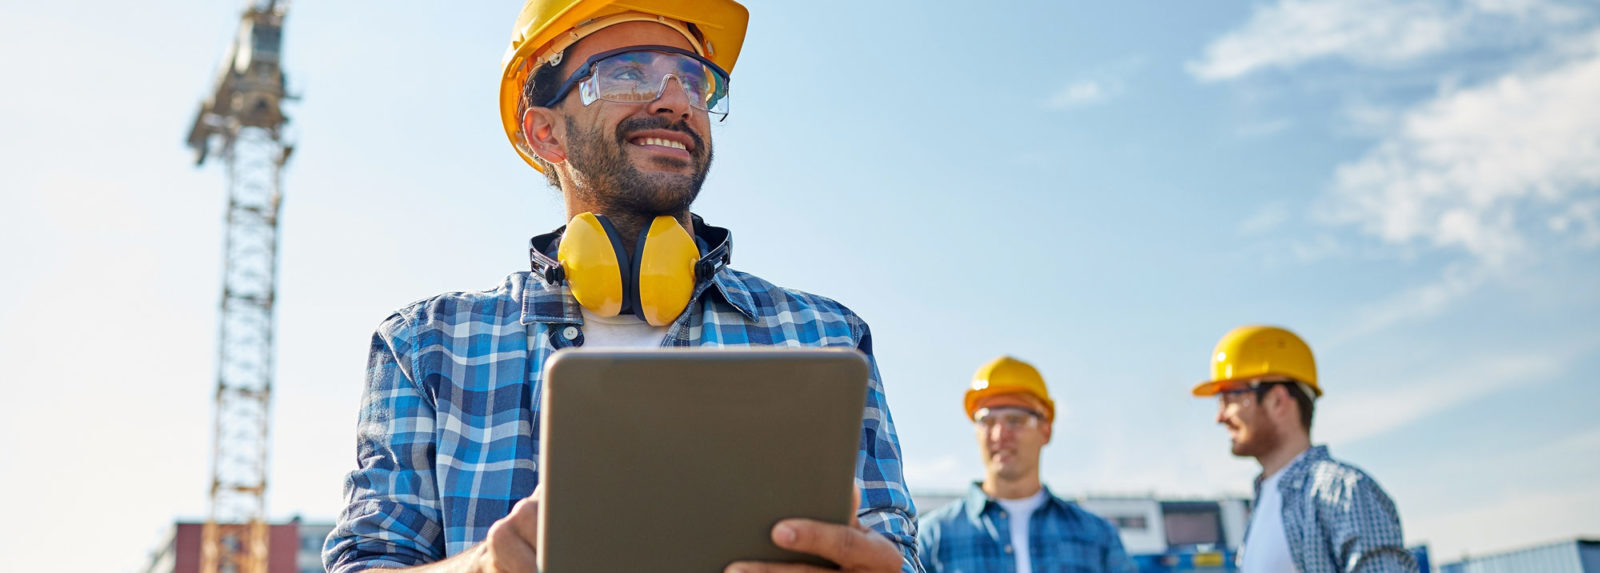 A man in a hard hat and safety glasses holding a tablet, ready to work on a construction site.